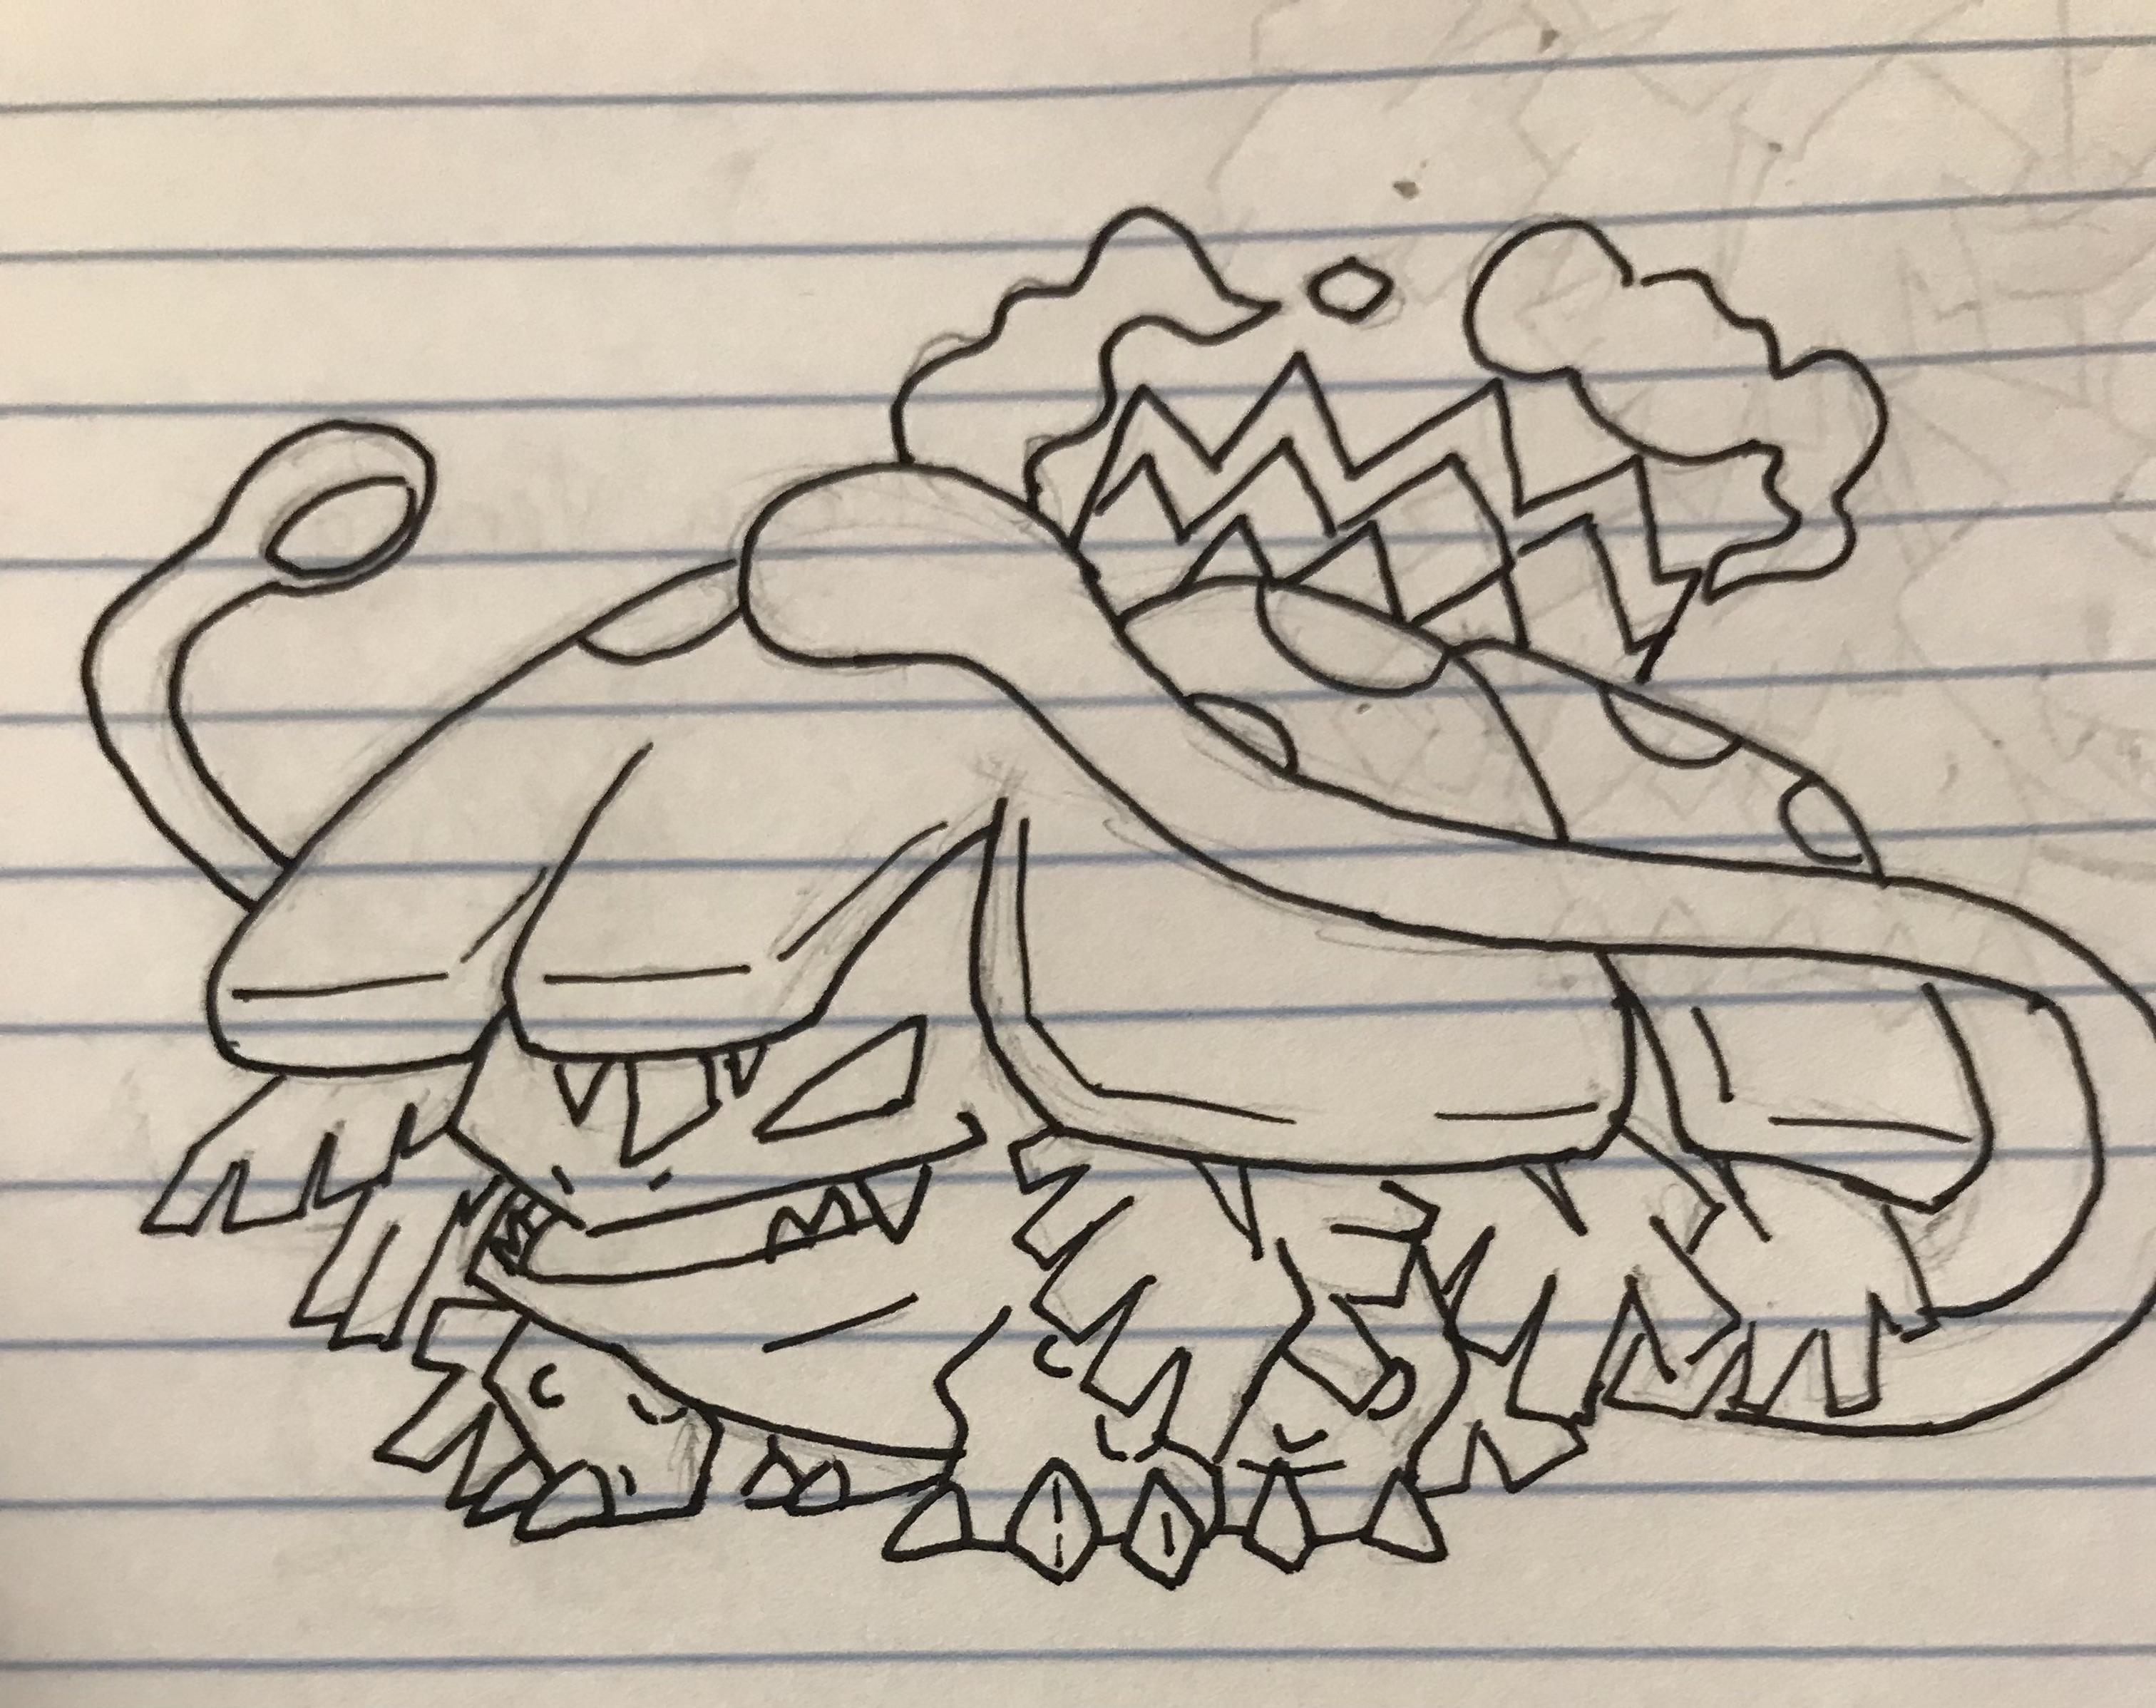 Oc drawing every pokãmon in the pokãdex because i have nothing better to do day gigantamax venusaur rpokemon